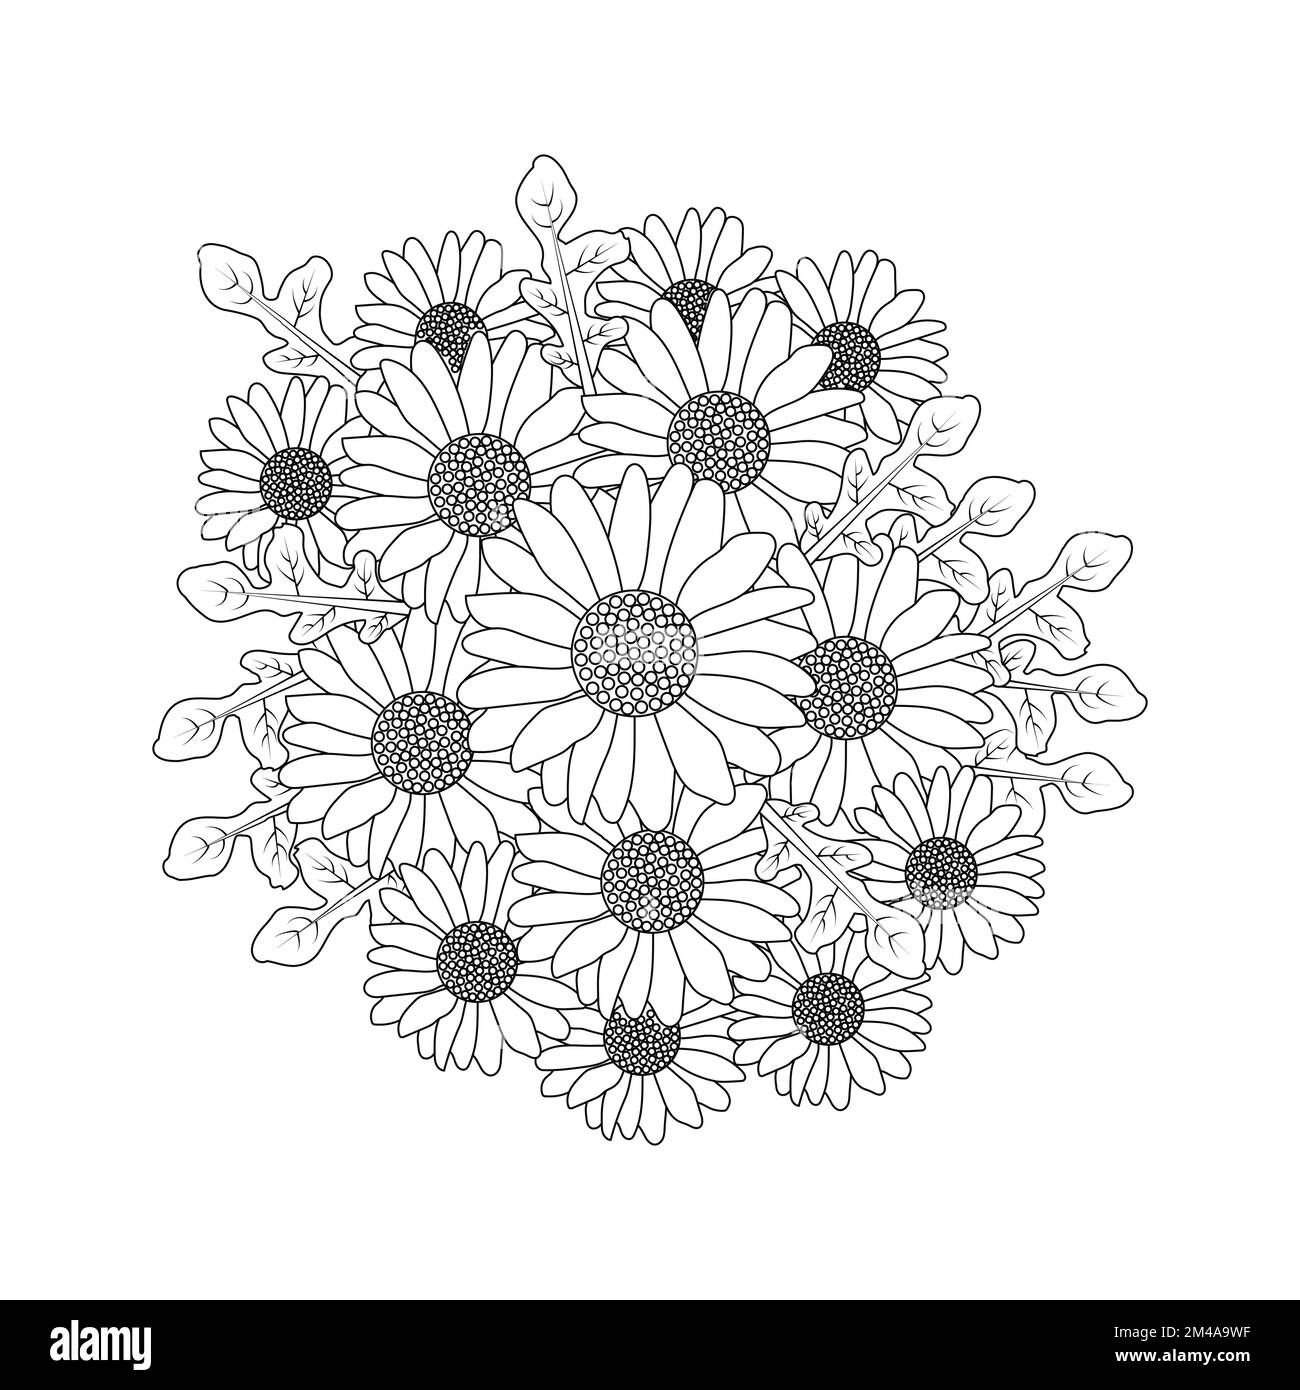 Vector Flower Mandala Coloring Book For Adults And Children Line Art In  Modern Graphic Styles Flowers Leaves And Twigs In Fashionable Styling A  Series Of Coloring Pages With Mandalas Stock Illustration 